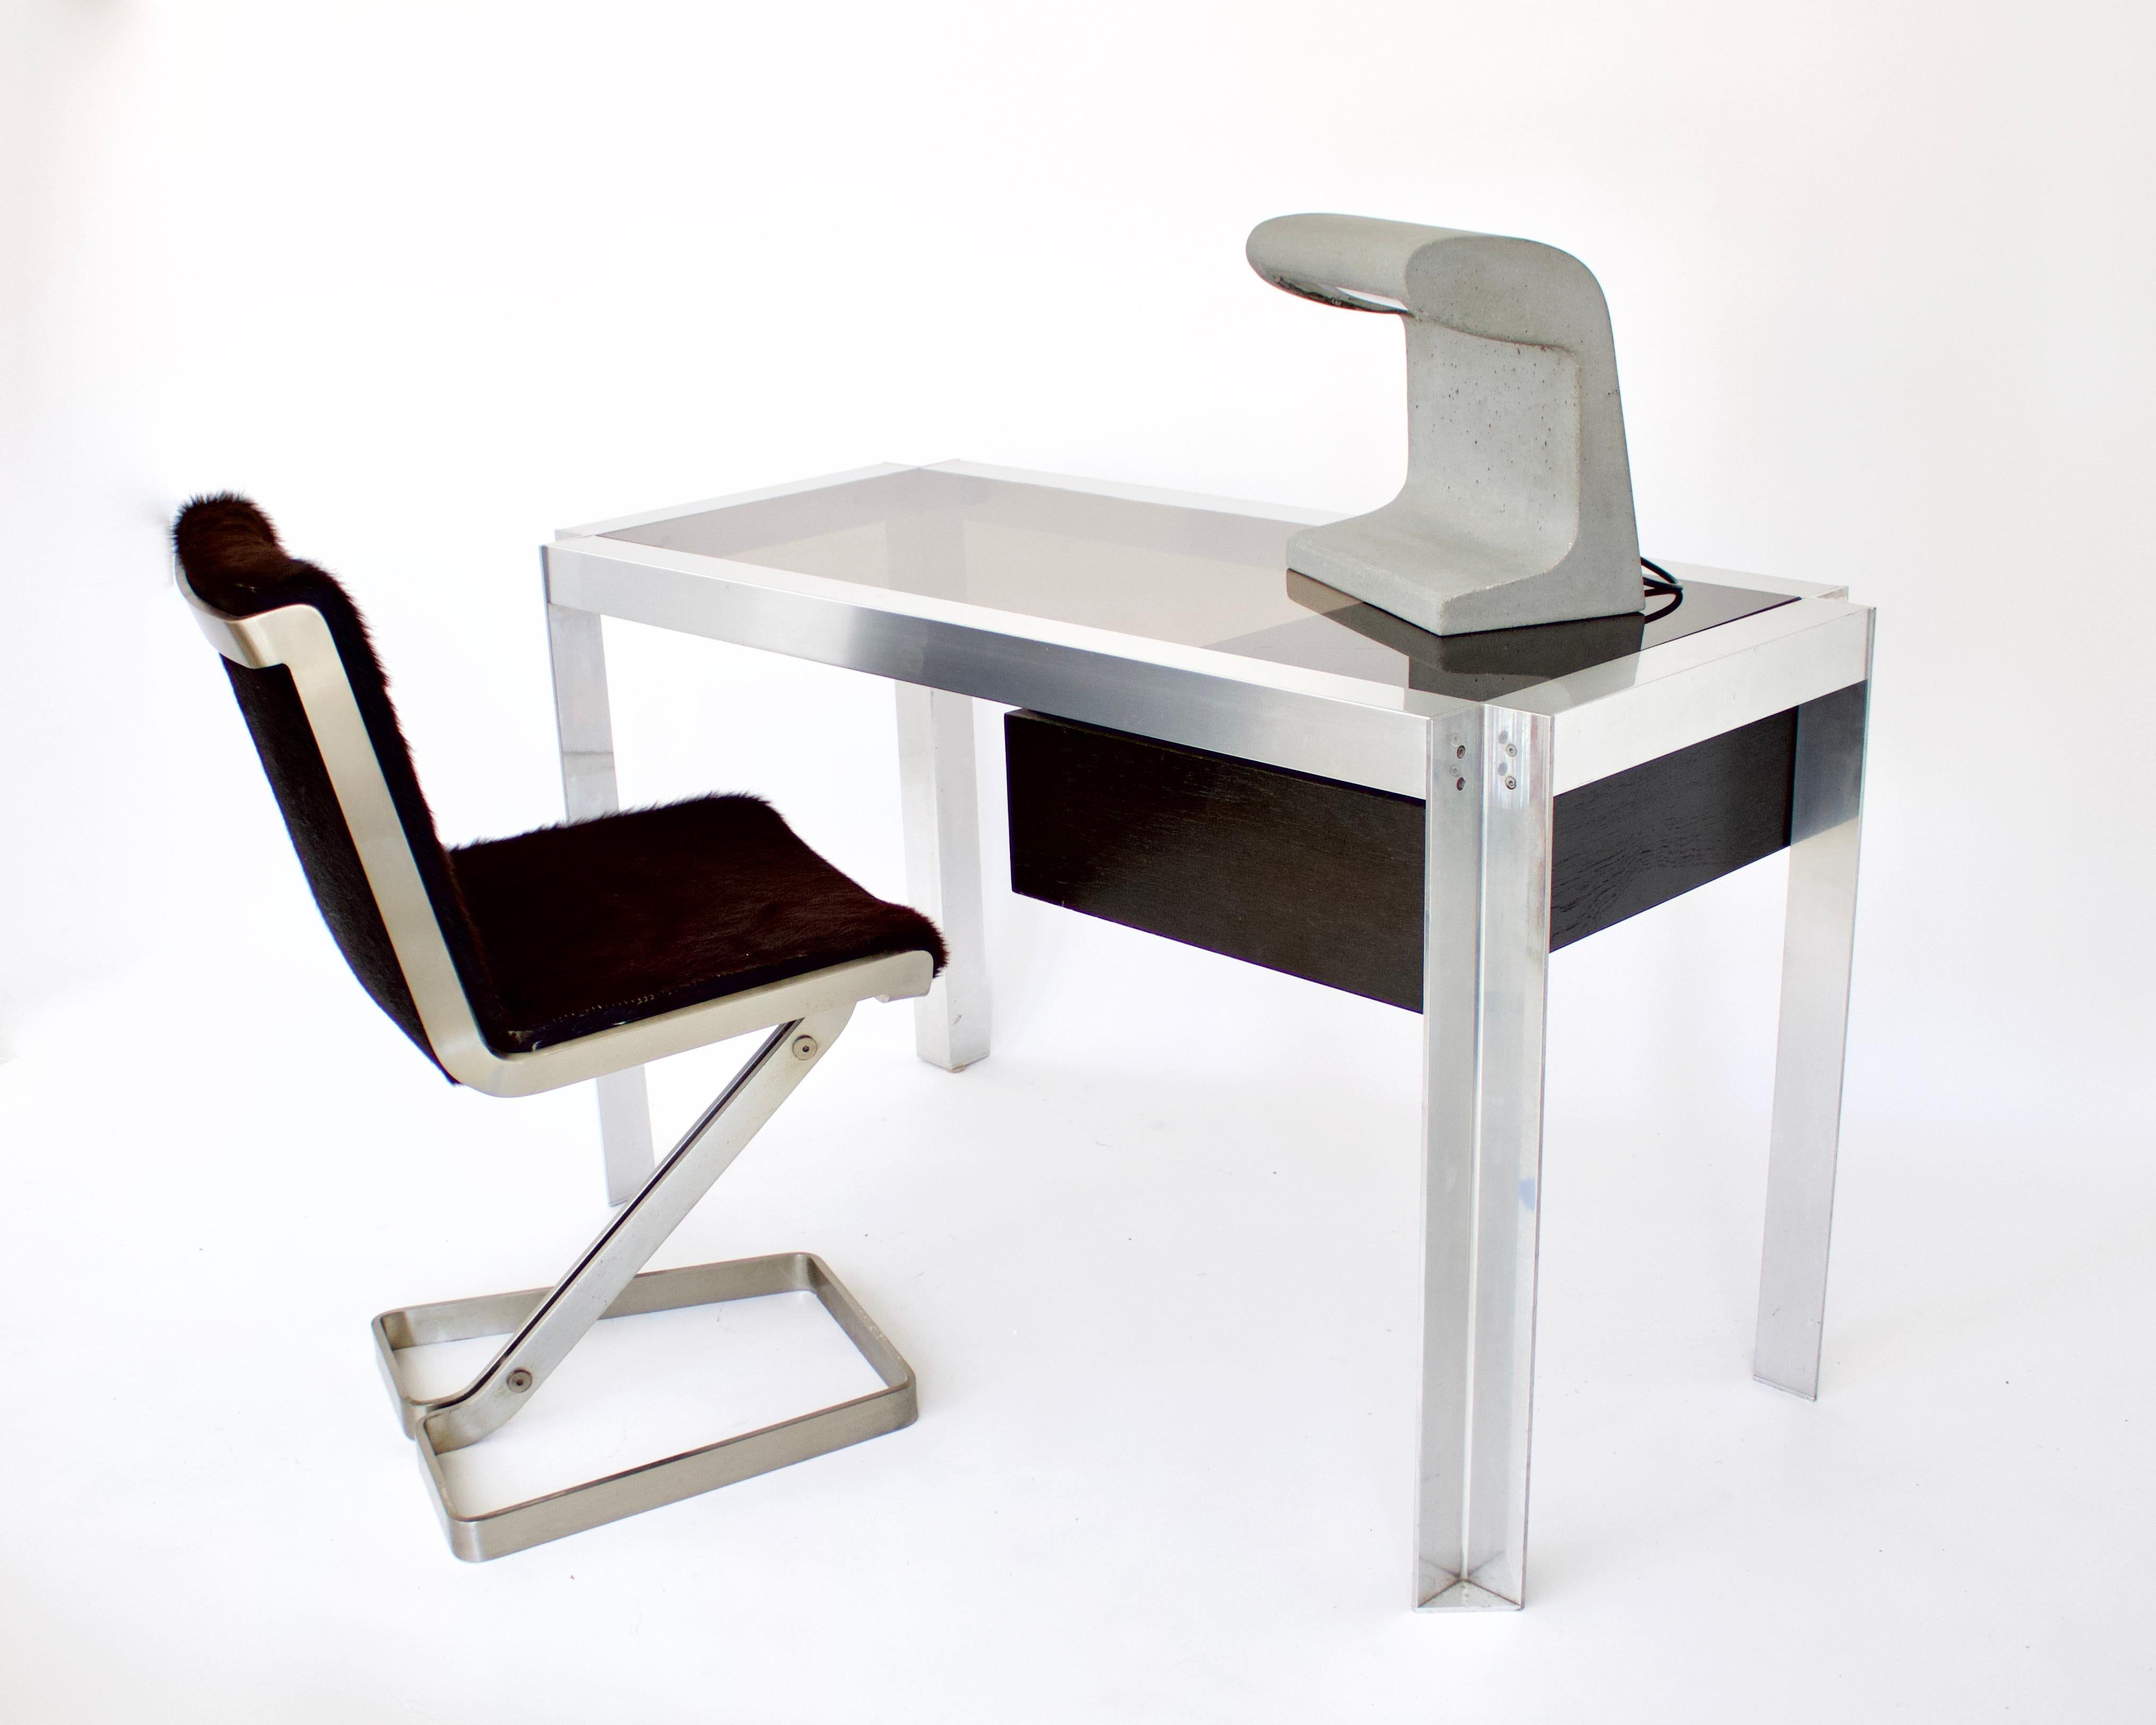 Italian Stainless Steel Desk Chair by Forma Nova, circa 1970 For Sale 7